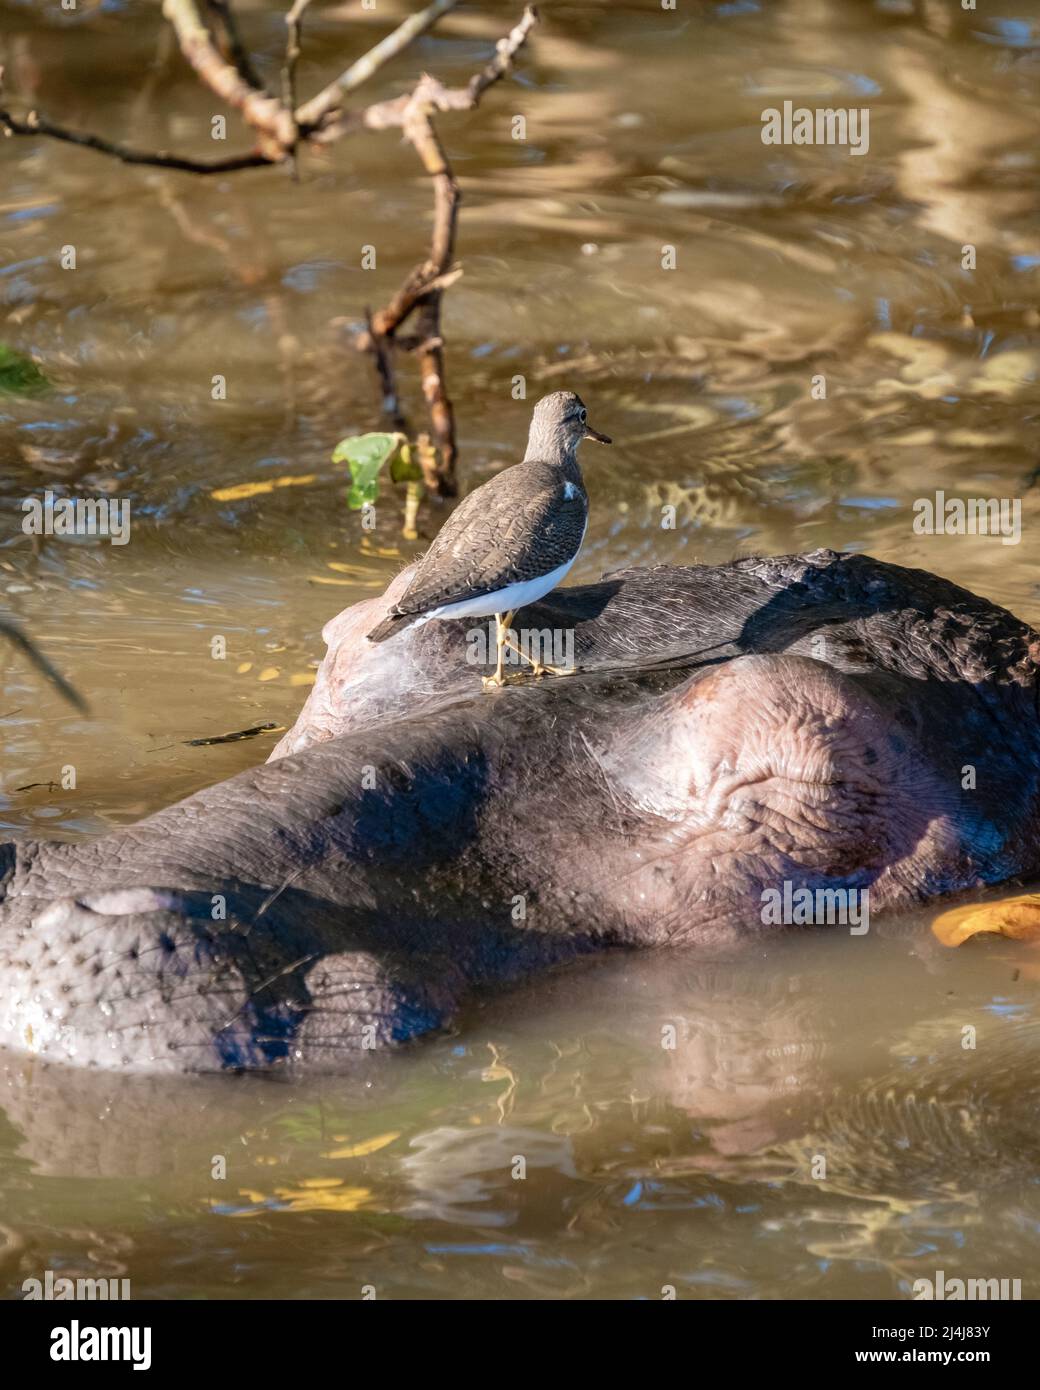 A hippopotamus is a semi-aquatic animal, quite common in rivers and lakes. during the day they remain cool by staying in the water or mud. Hippos took at Lake St. Lucia South Africa Hippo Stock Photo